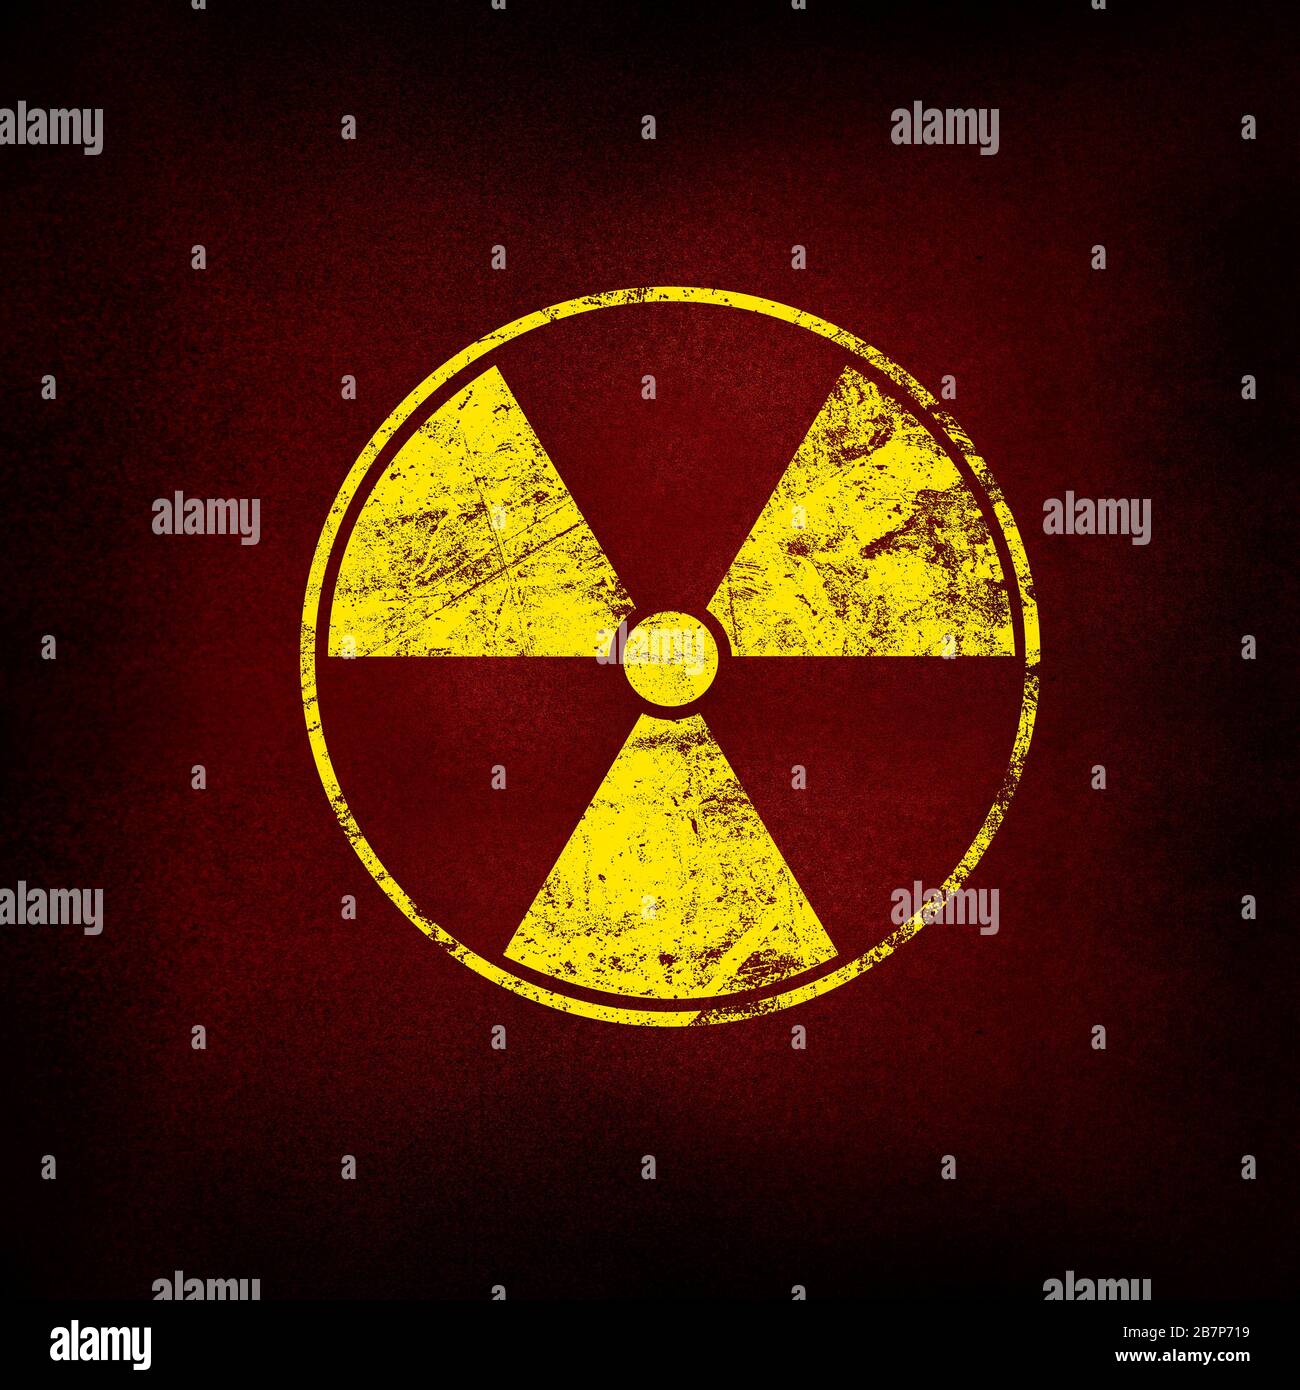 Yellow radioactive hazard warning sign painted over grunge brown and black background with copy space Stock Photo